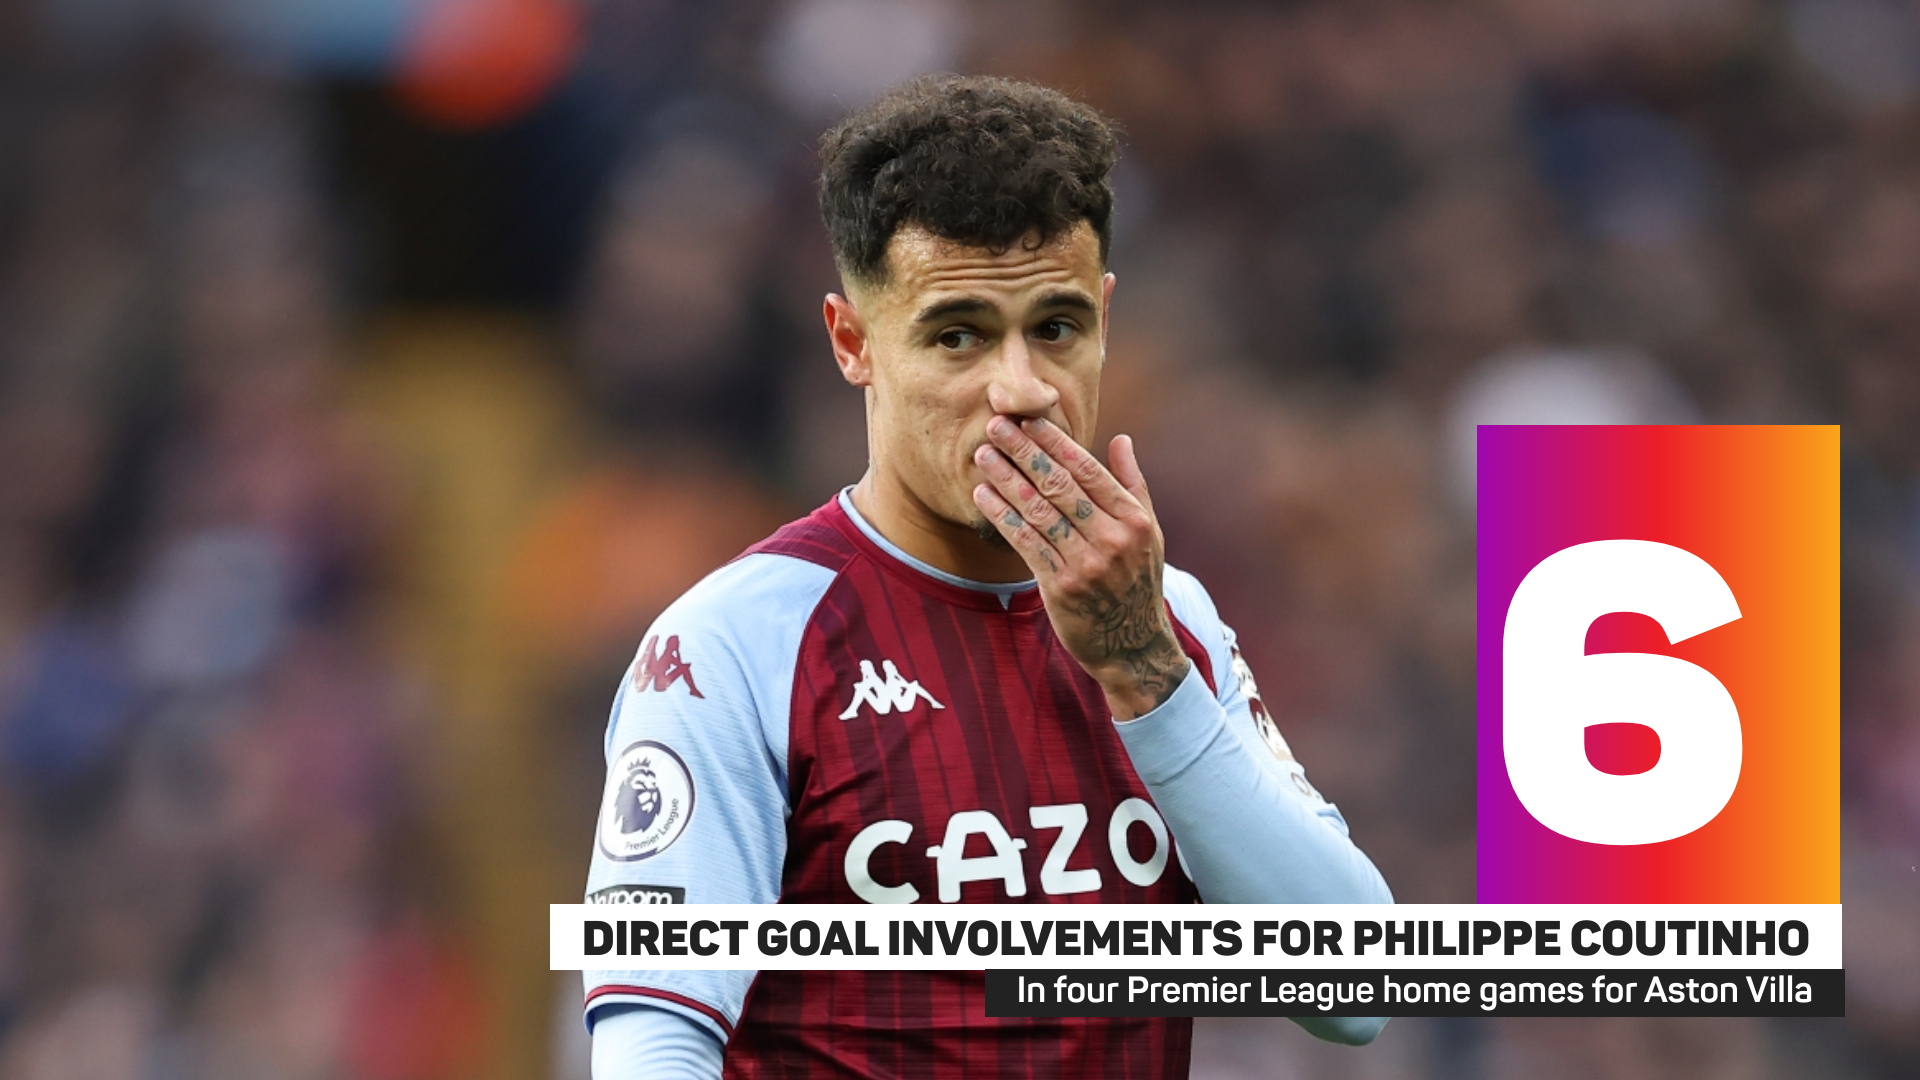 Philippe Coutinho has made an impressive start to life at Aston Villa